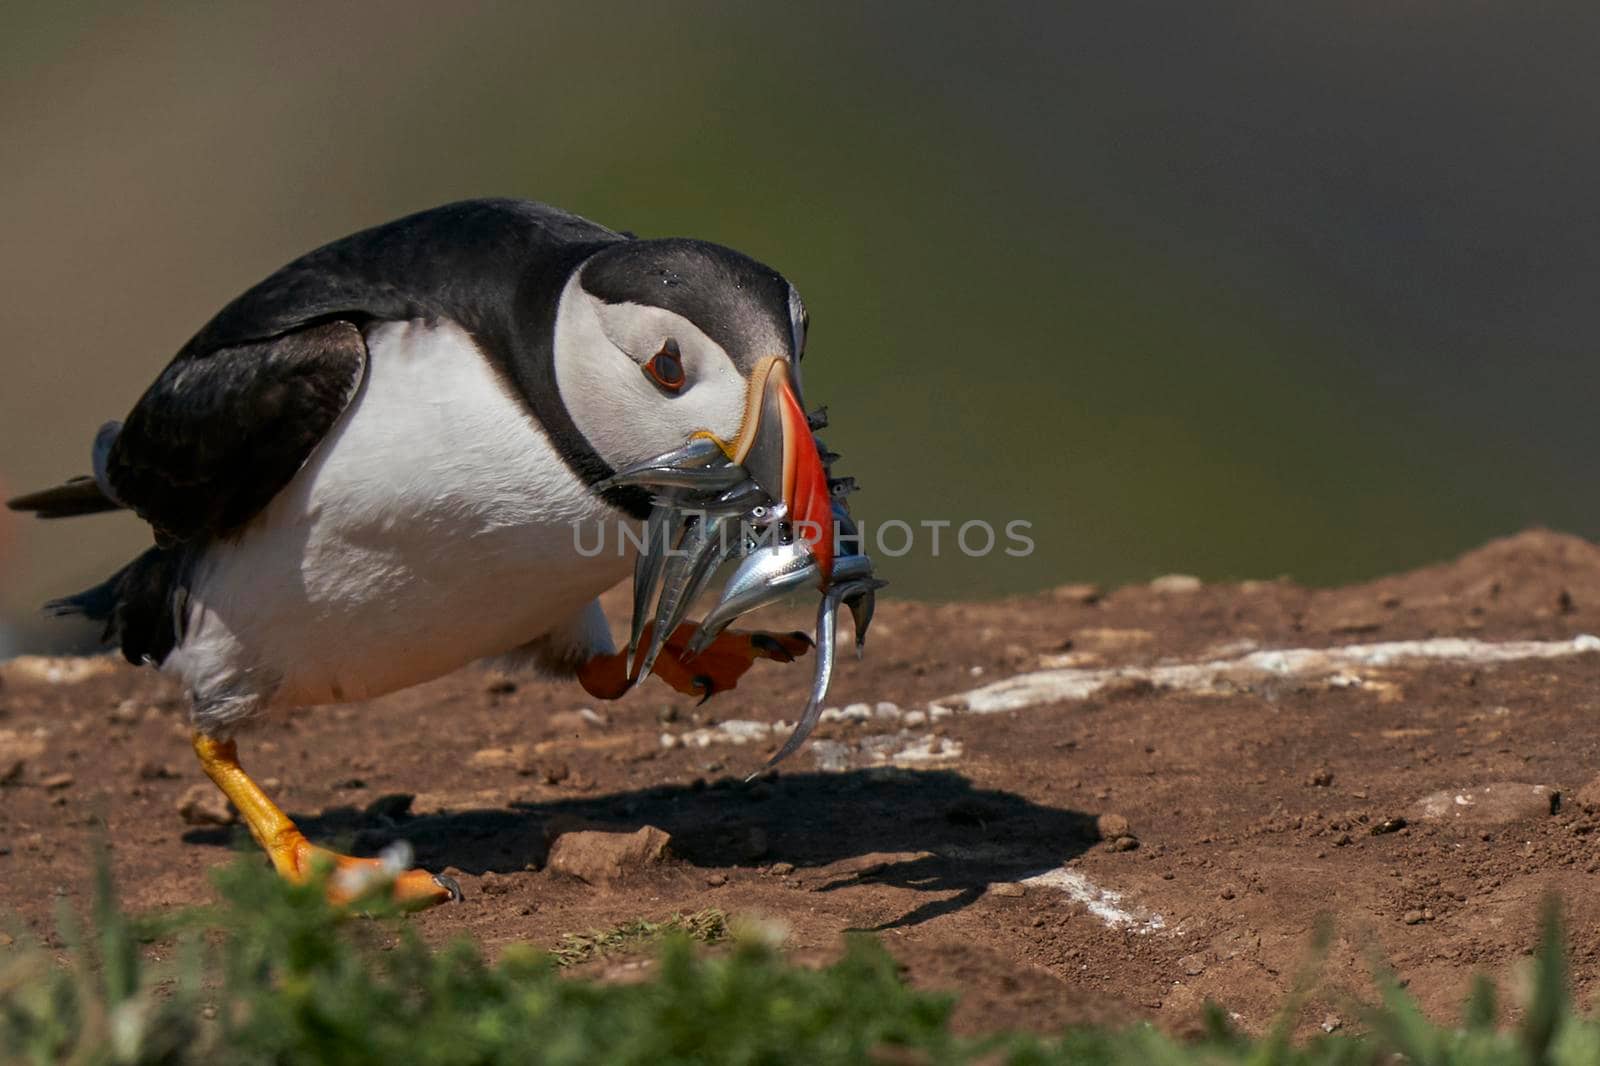 Atlantic puffin (Fratercula arctica) with small fish in its beak to feed its chick on the cliffs of Skomer Island off the coast of Pembrokeshire in Wales, United Kingdom